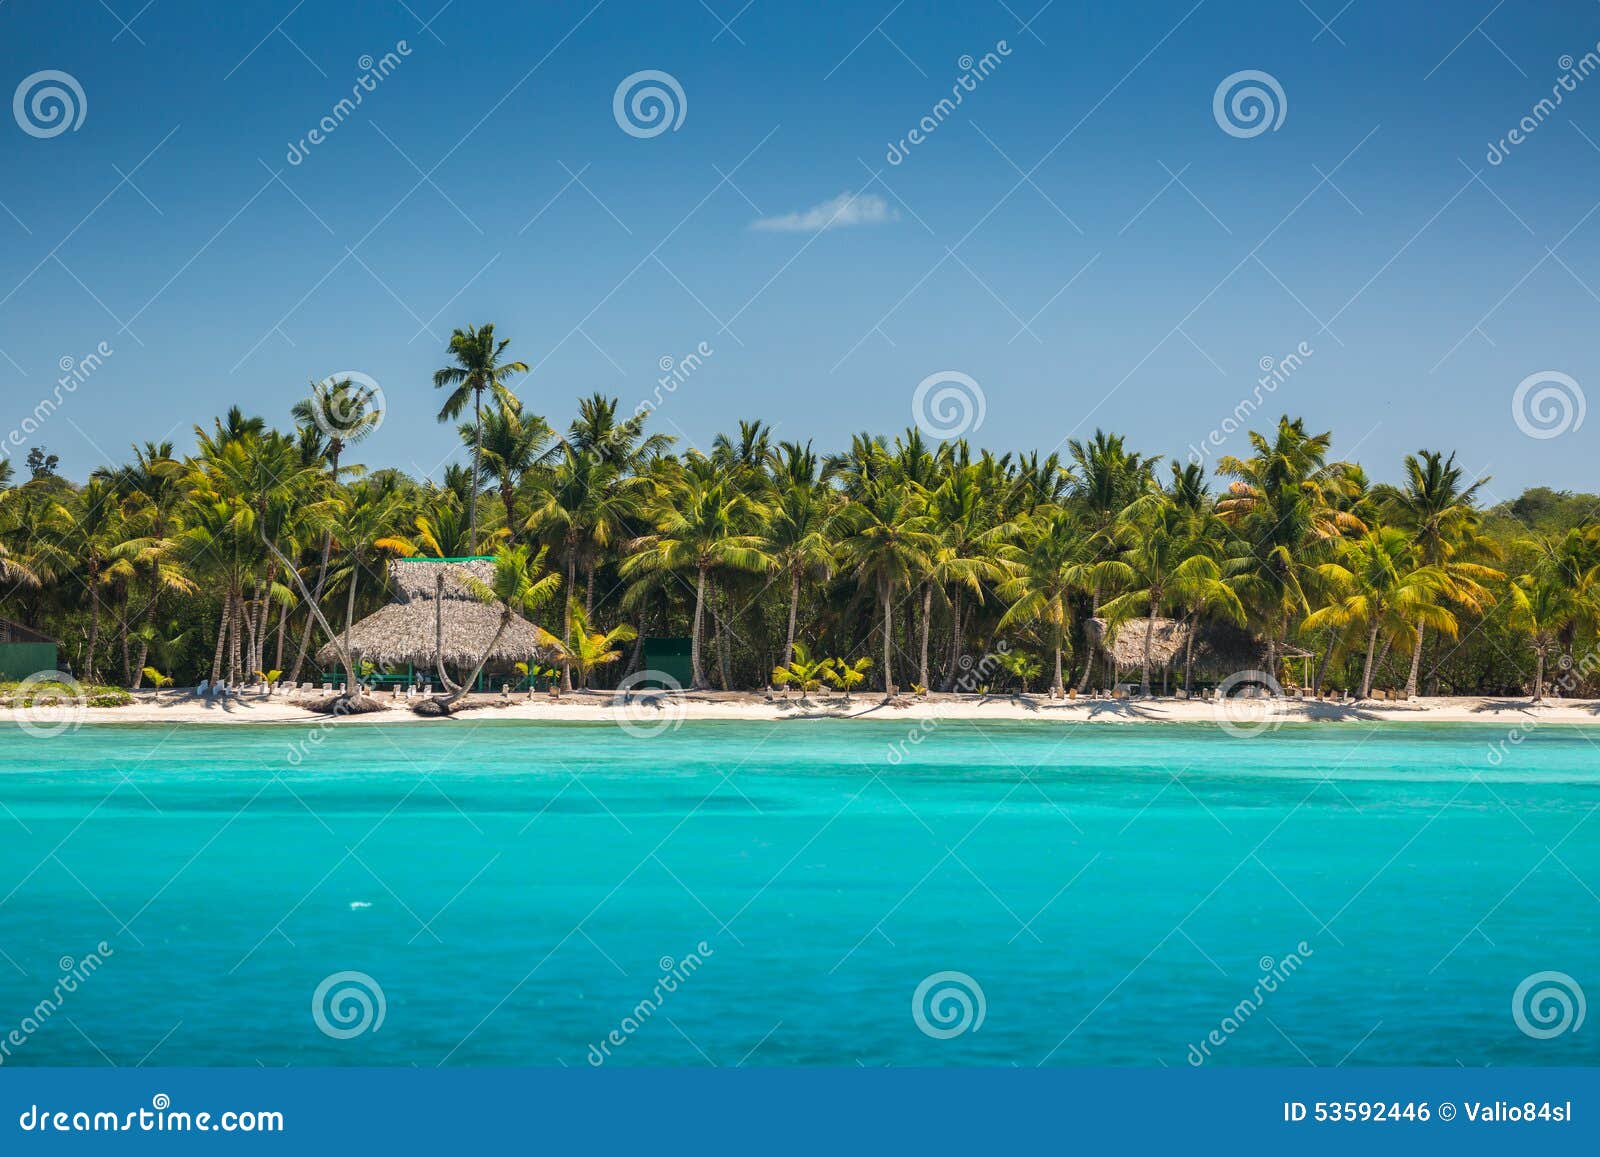 palm trees on the tropical beach, dominican republic